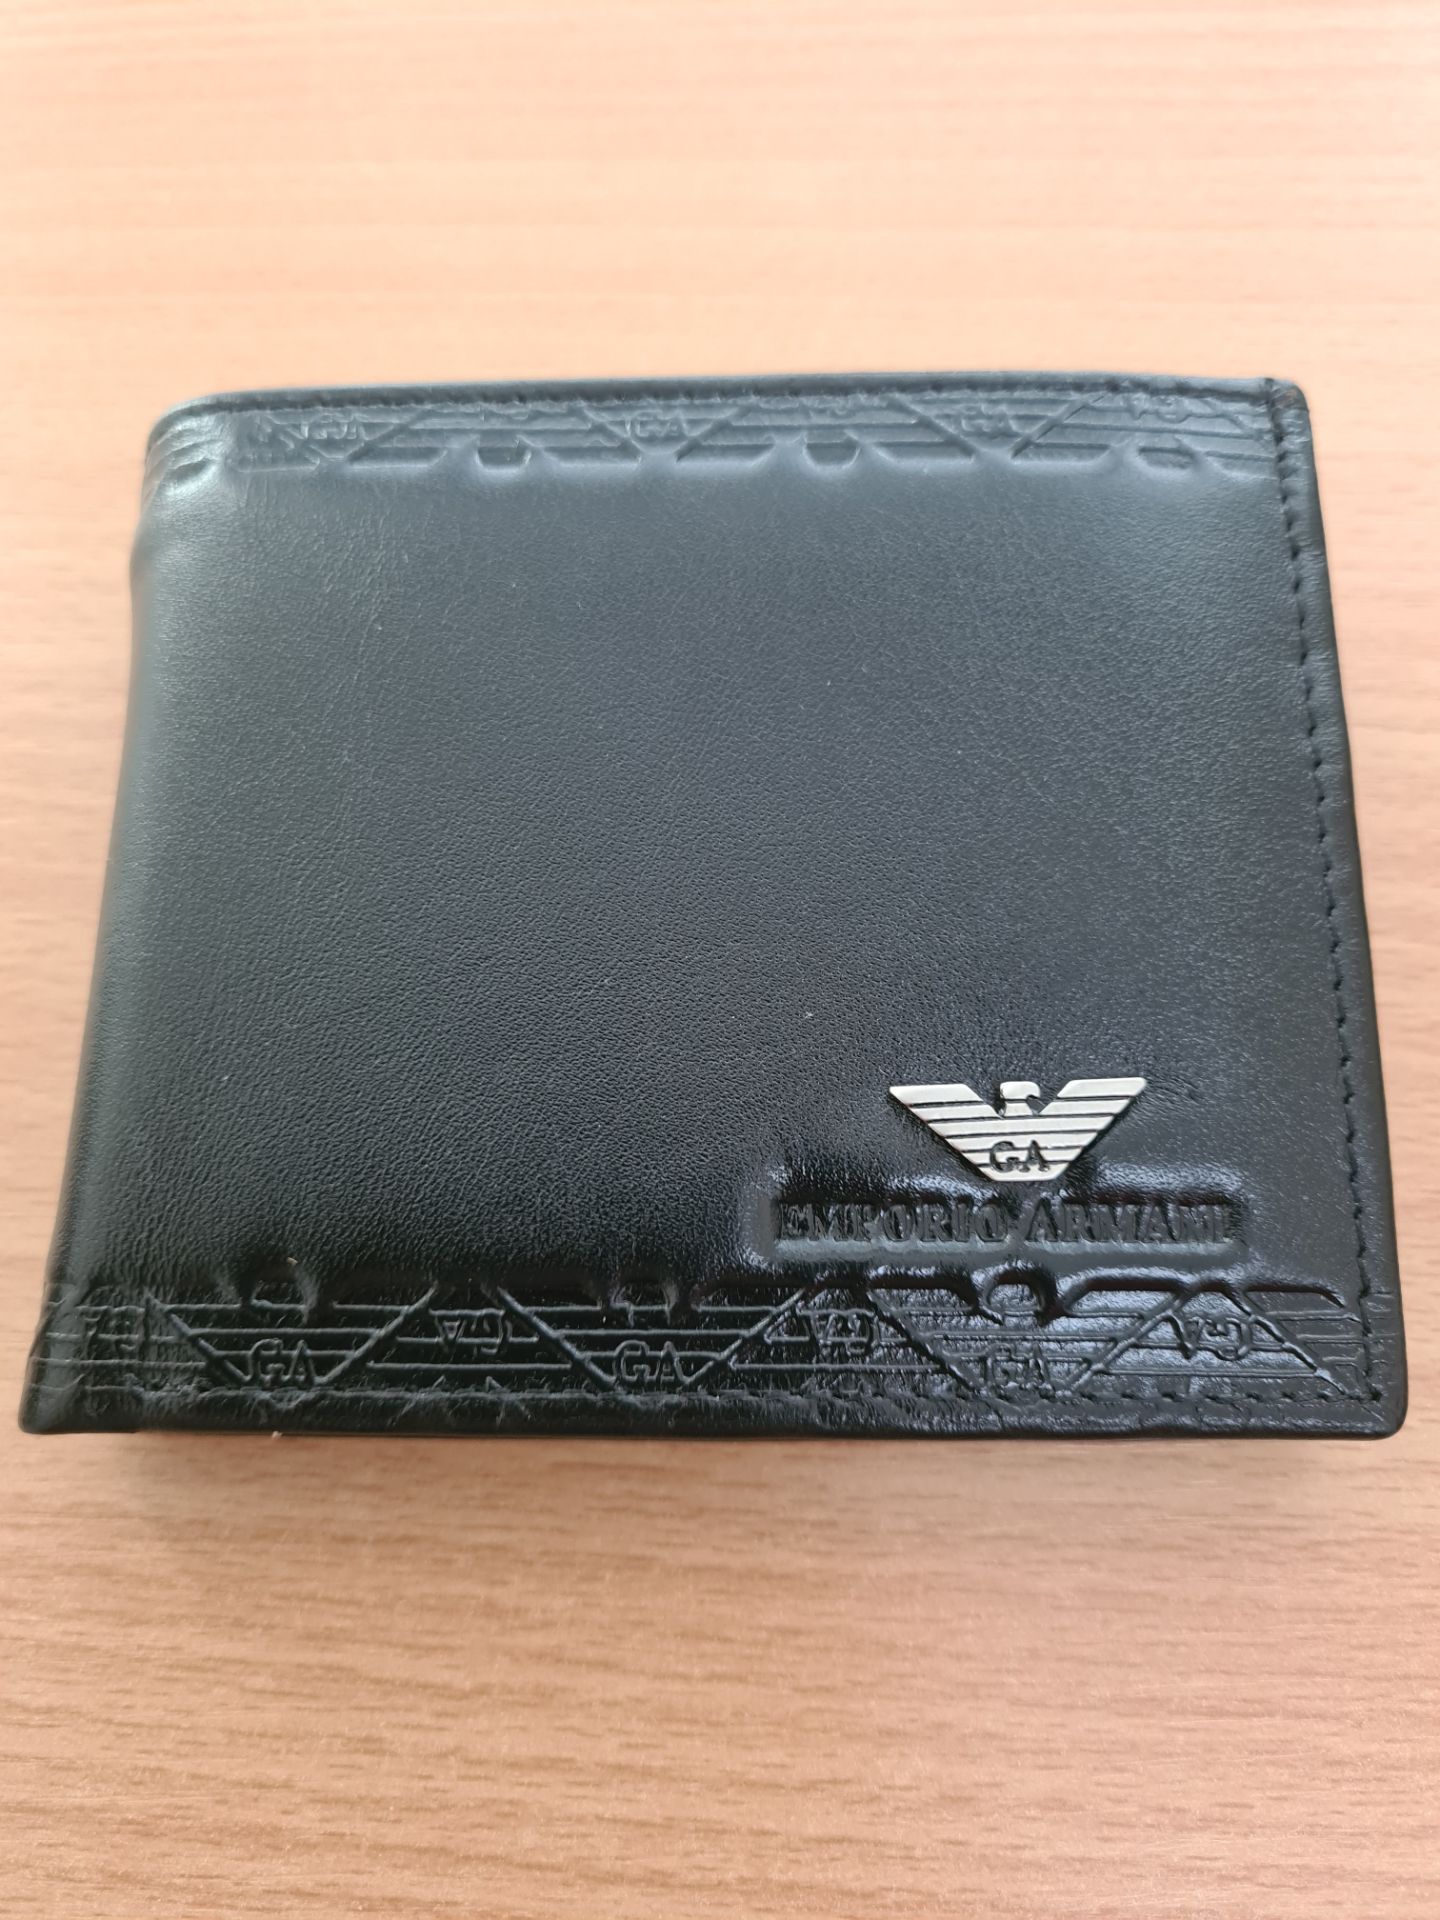 Emporio Armani Men's Leather Wallet - New With Box